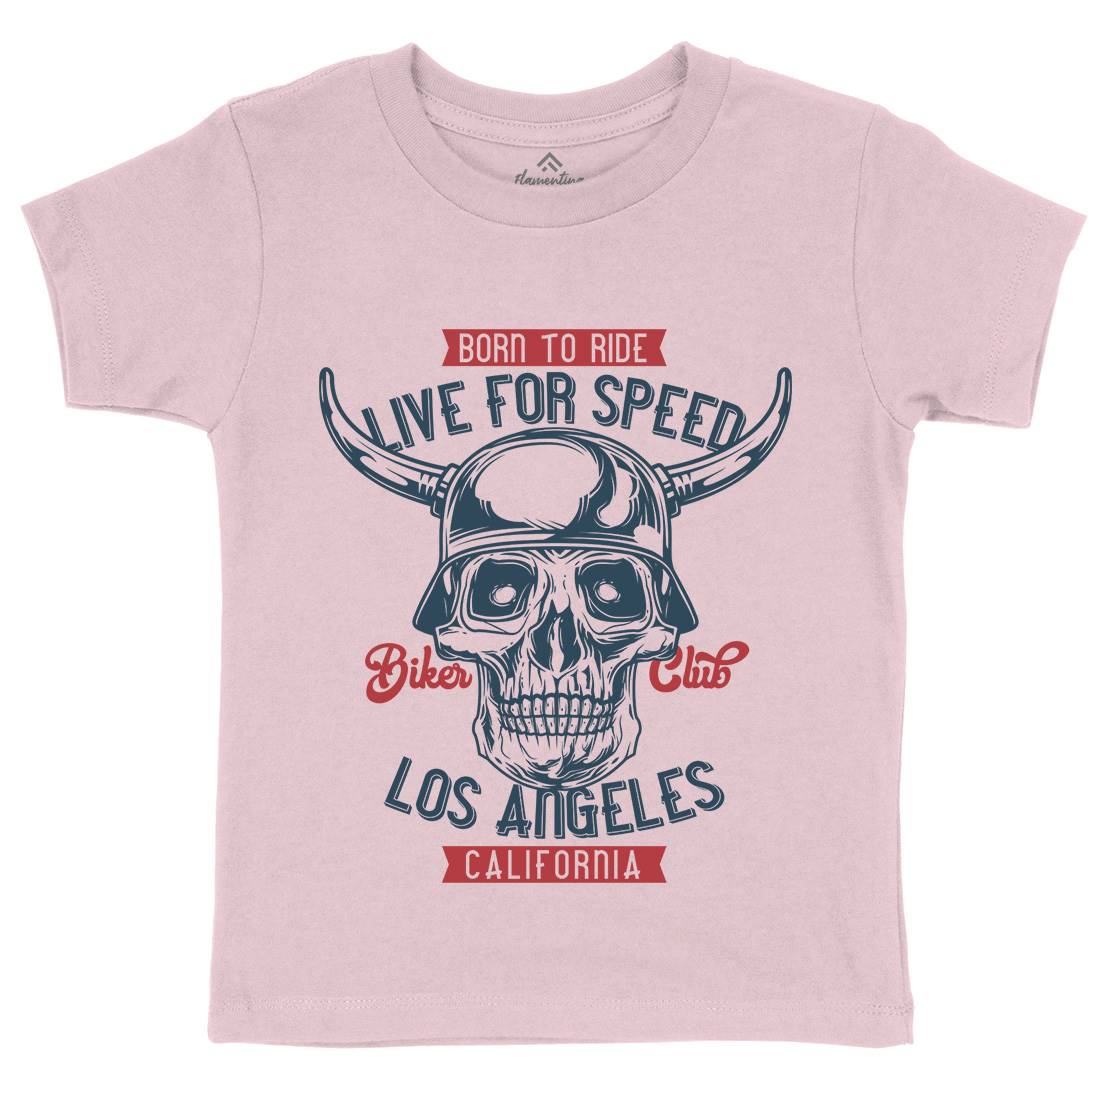 Live For Speed Kids Crew Neck T-Shirt Motorcycles B851